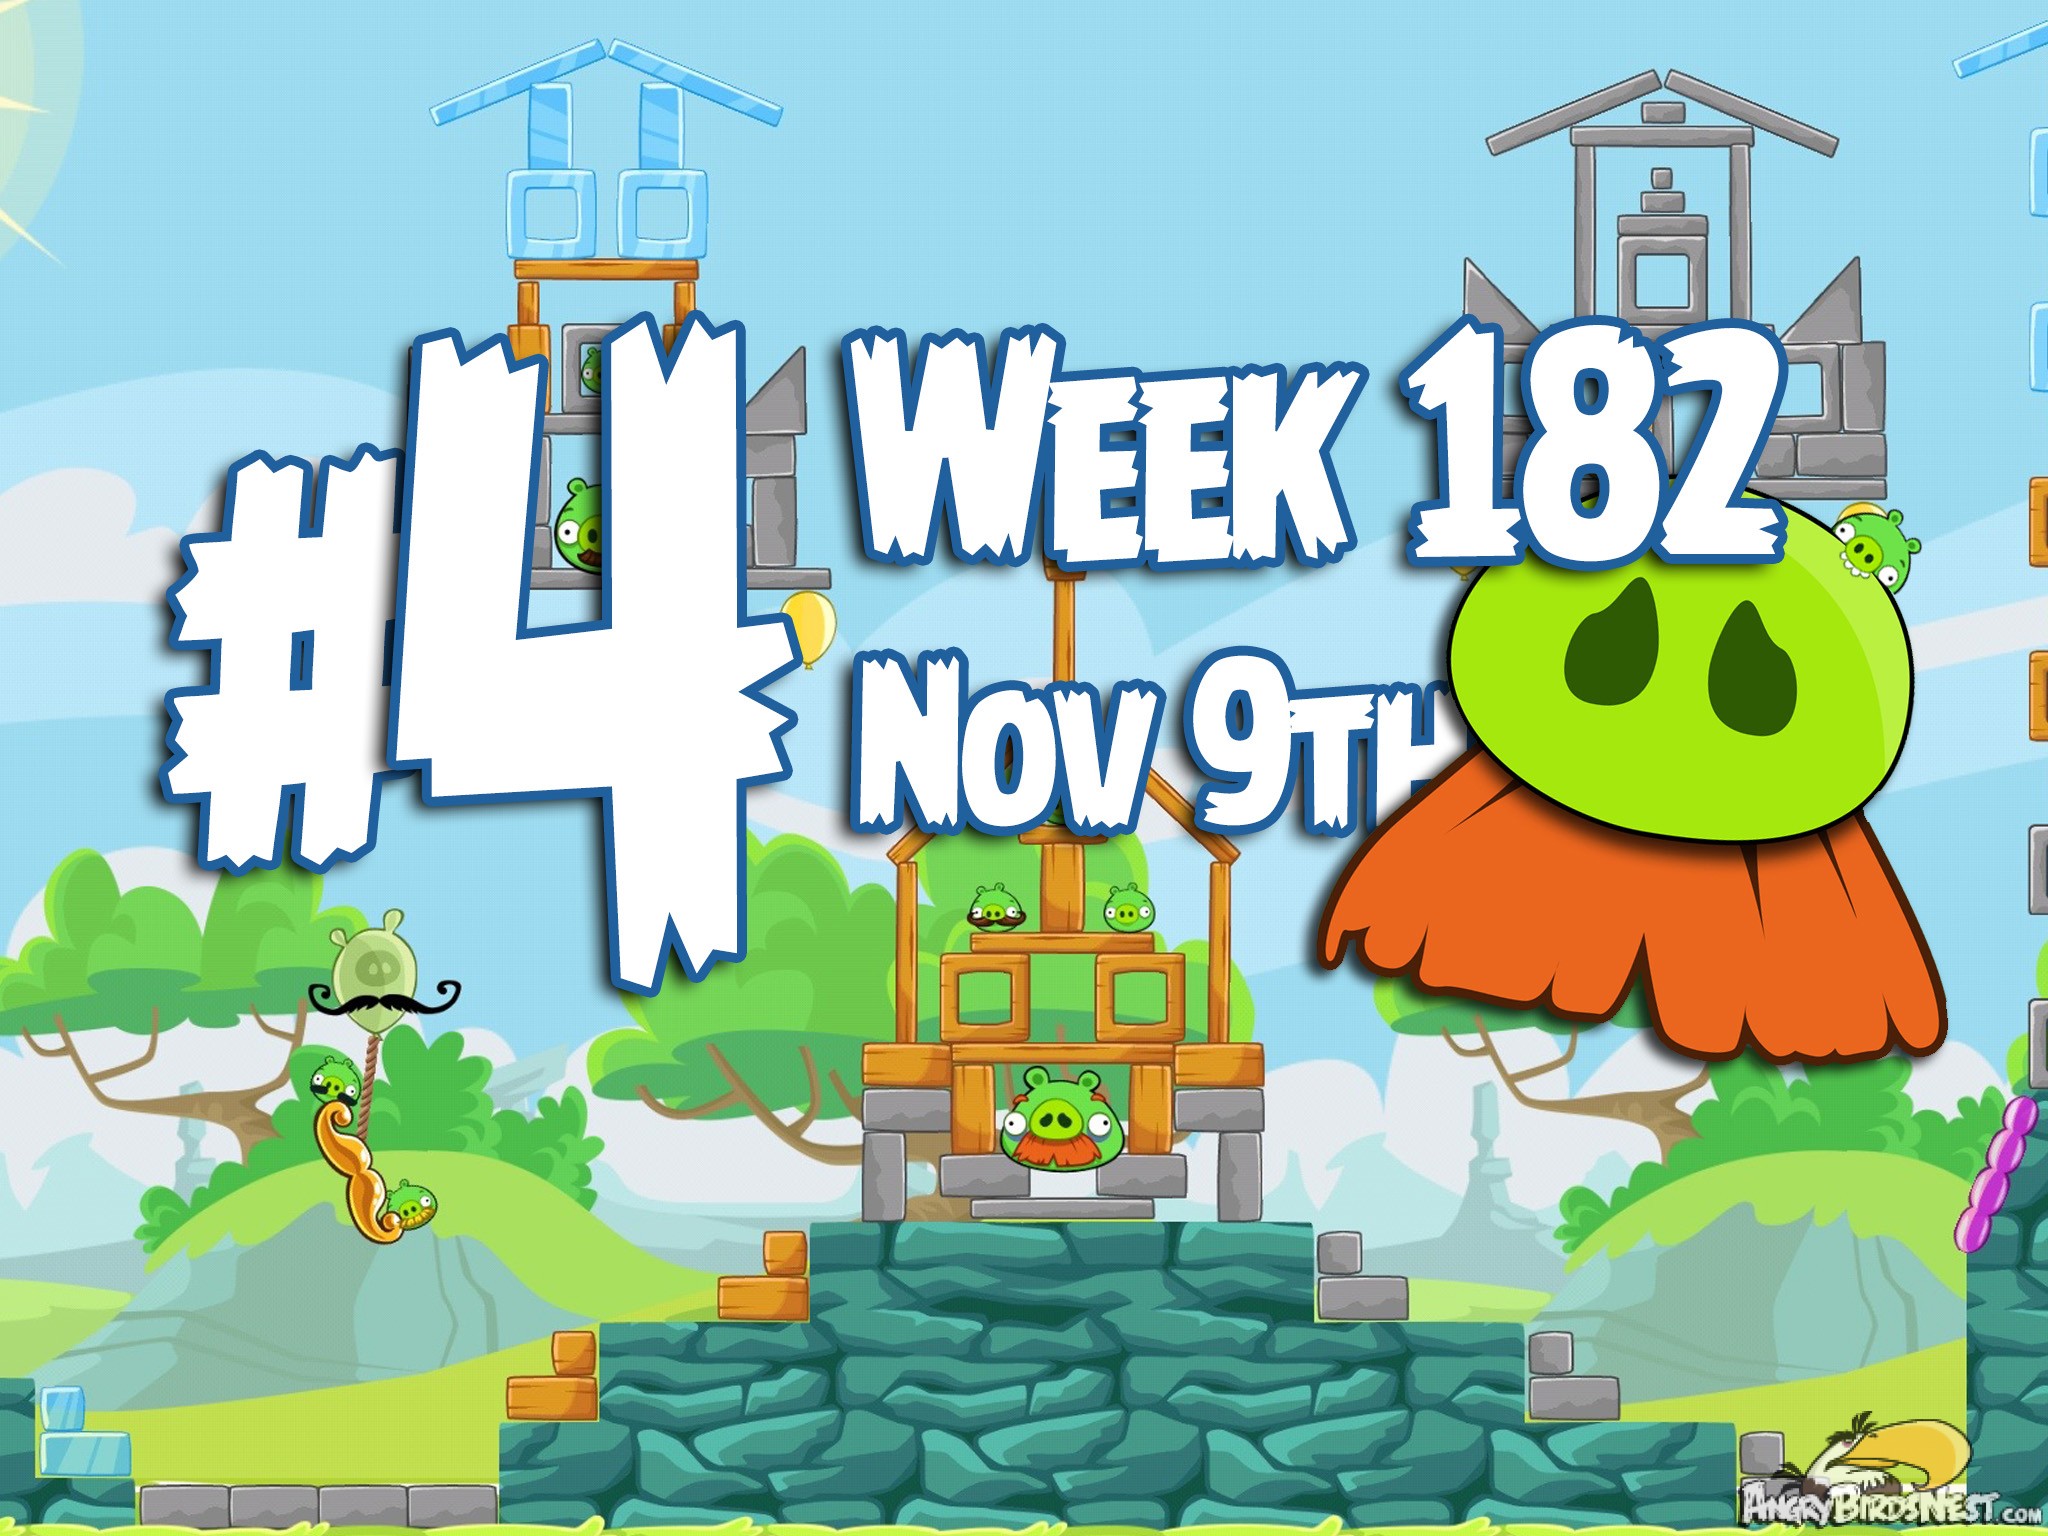 Angry Birds Friends Tournament Week 182 Level 4